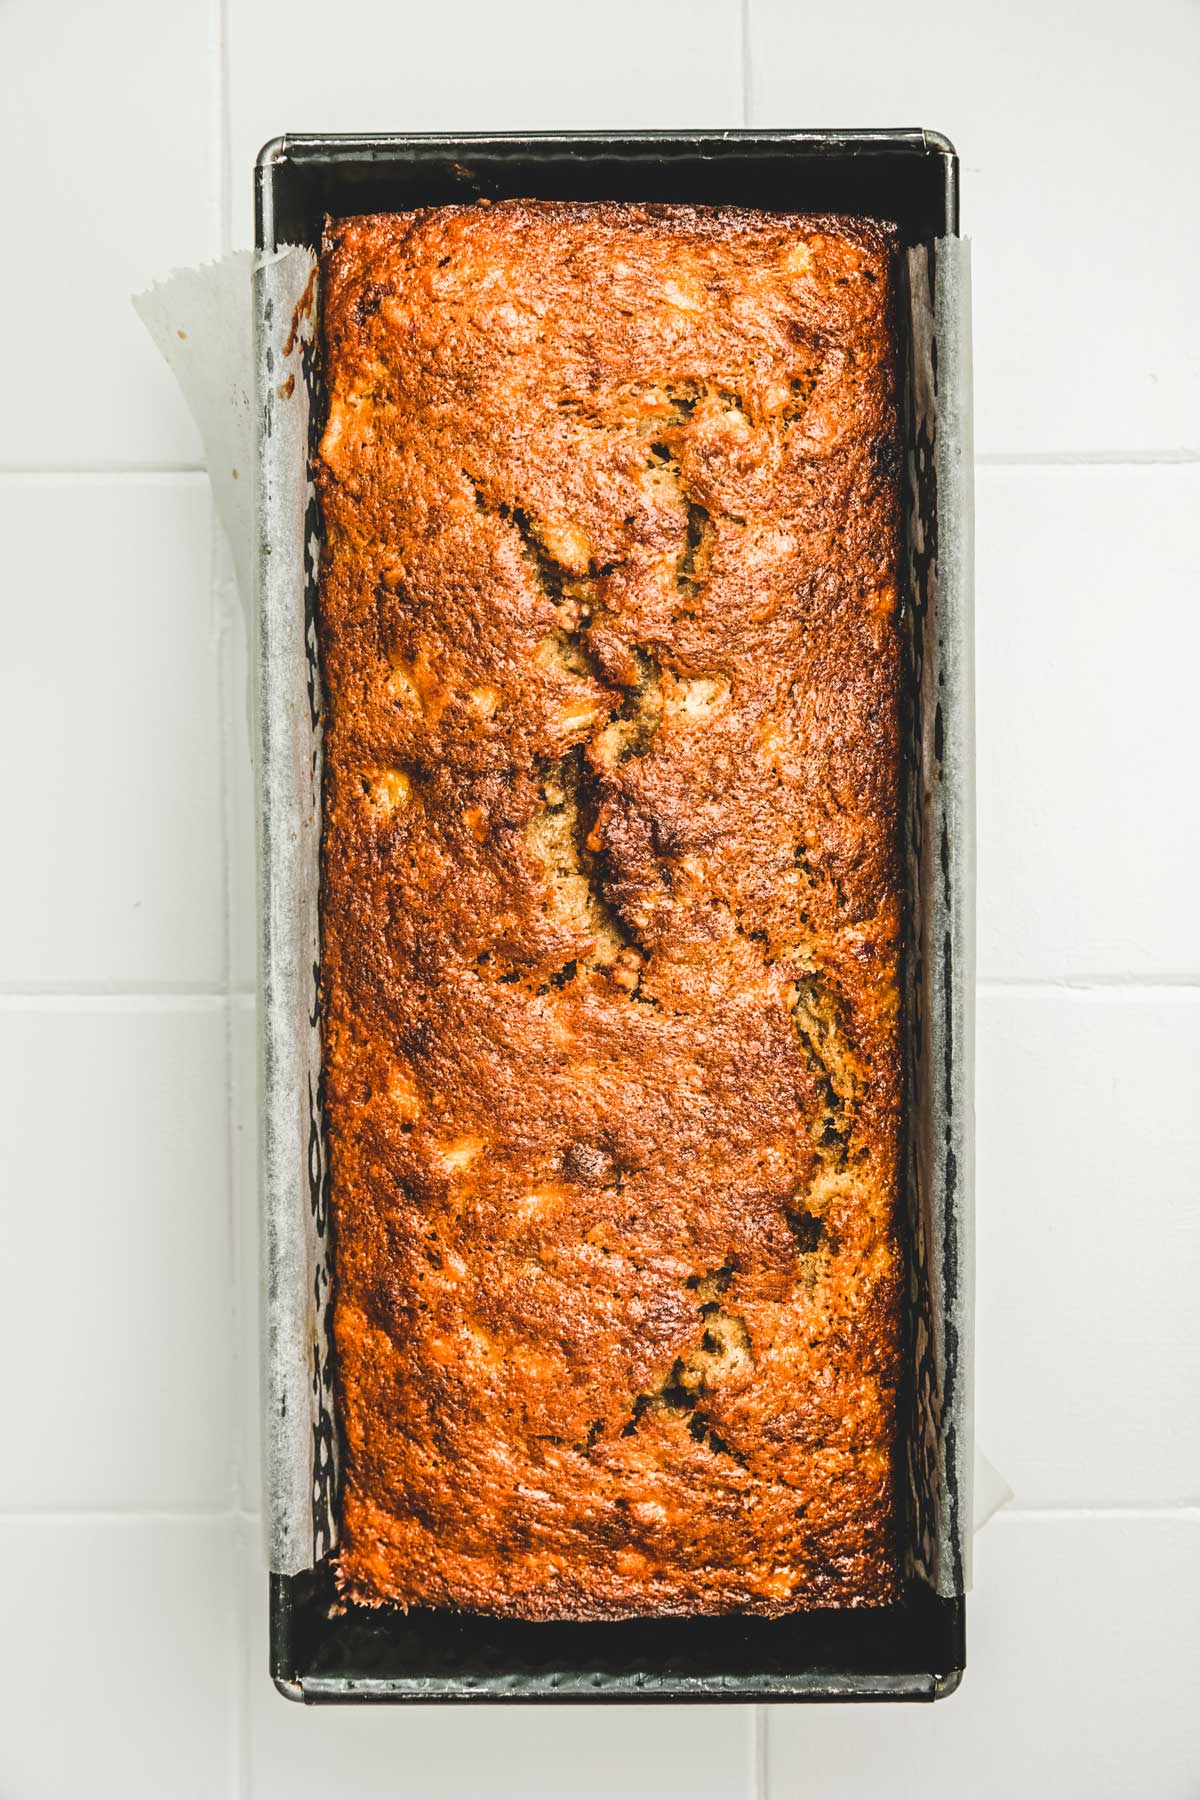 Banana walnut bread in a loaf pan after baking